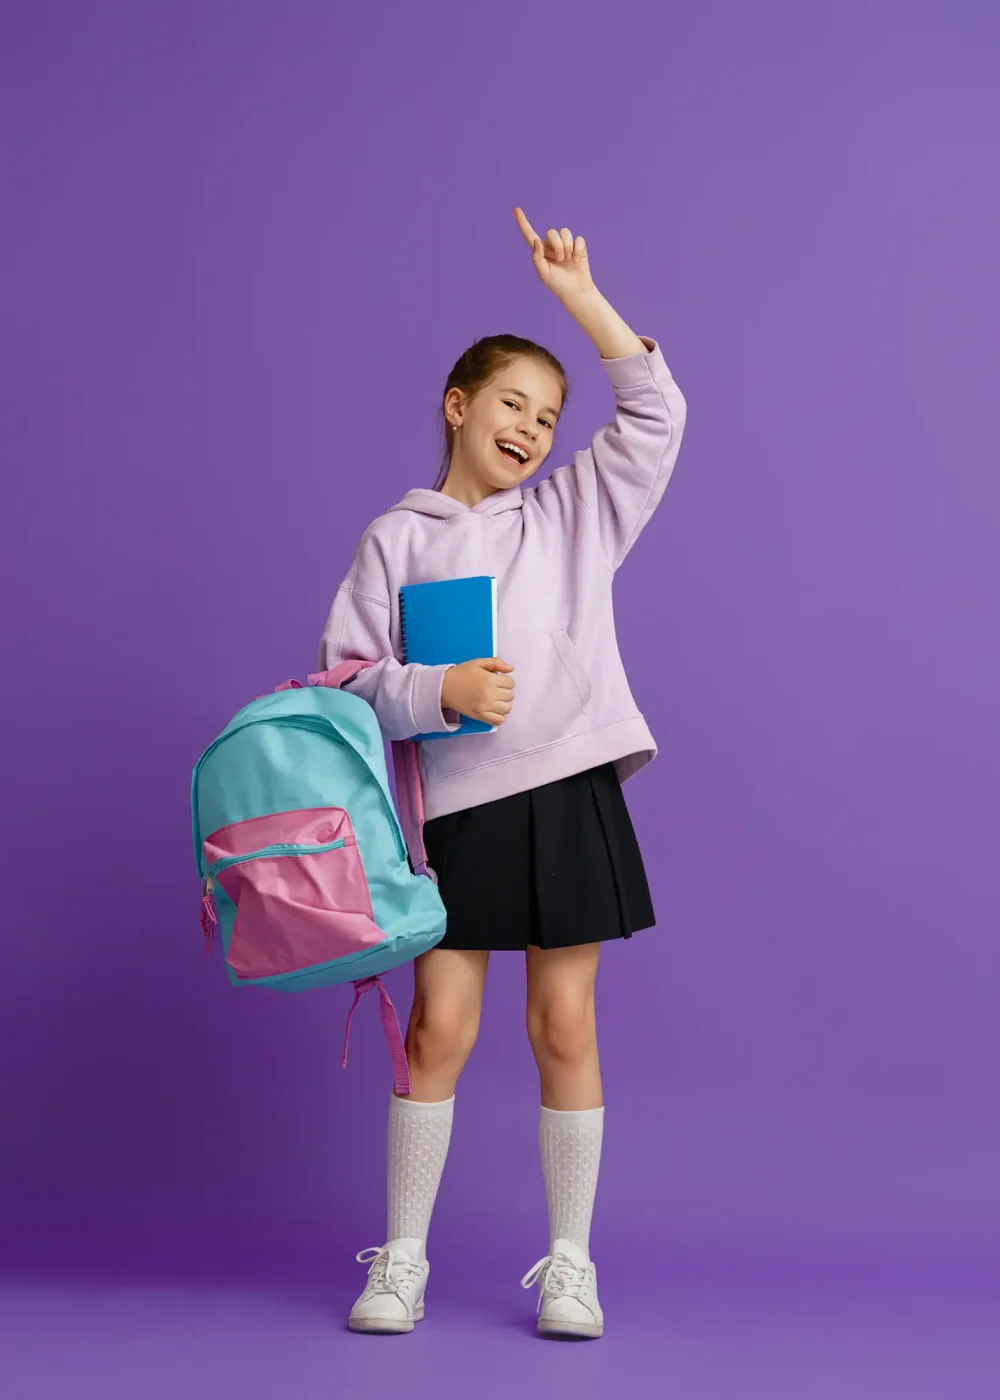 kid-with-backpack-on-color-background-2022-08-29-18-27-39-utc copia